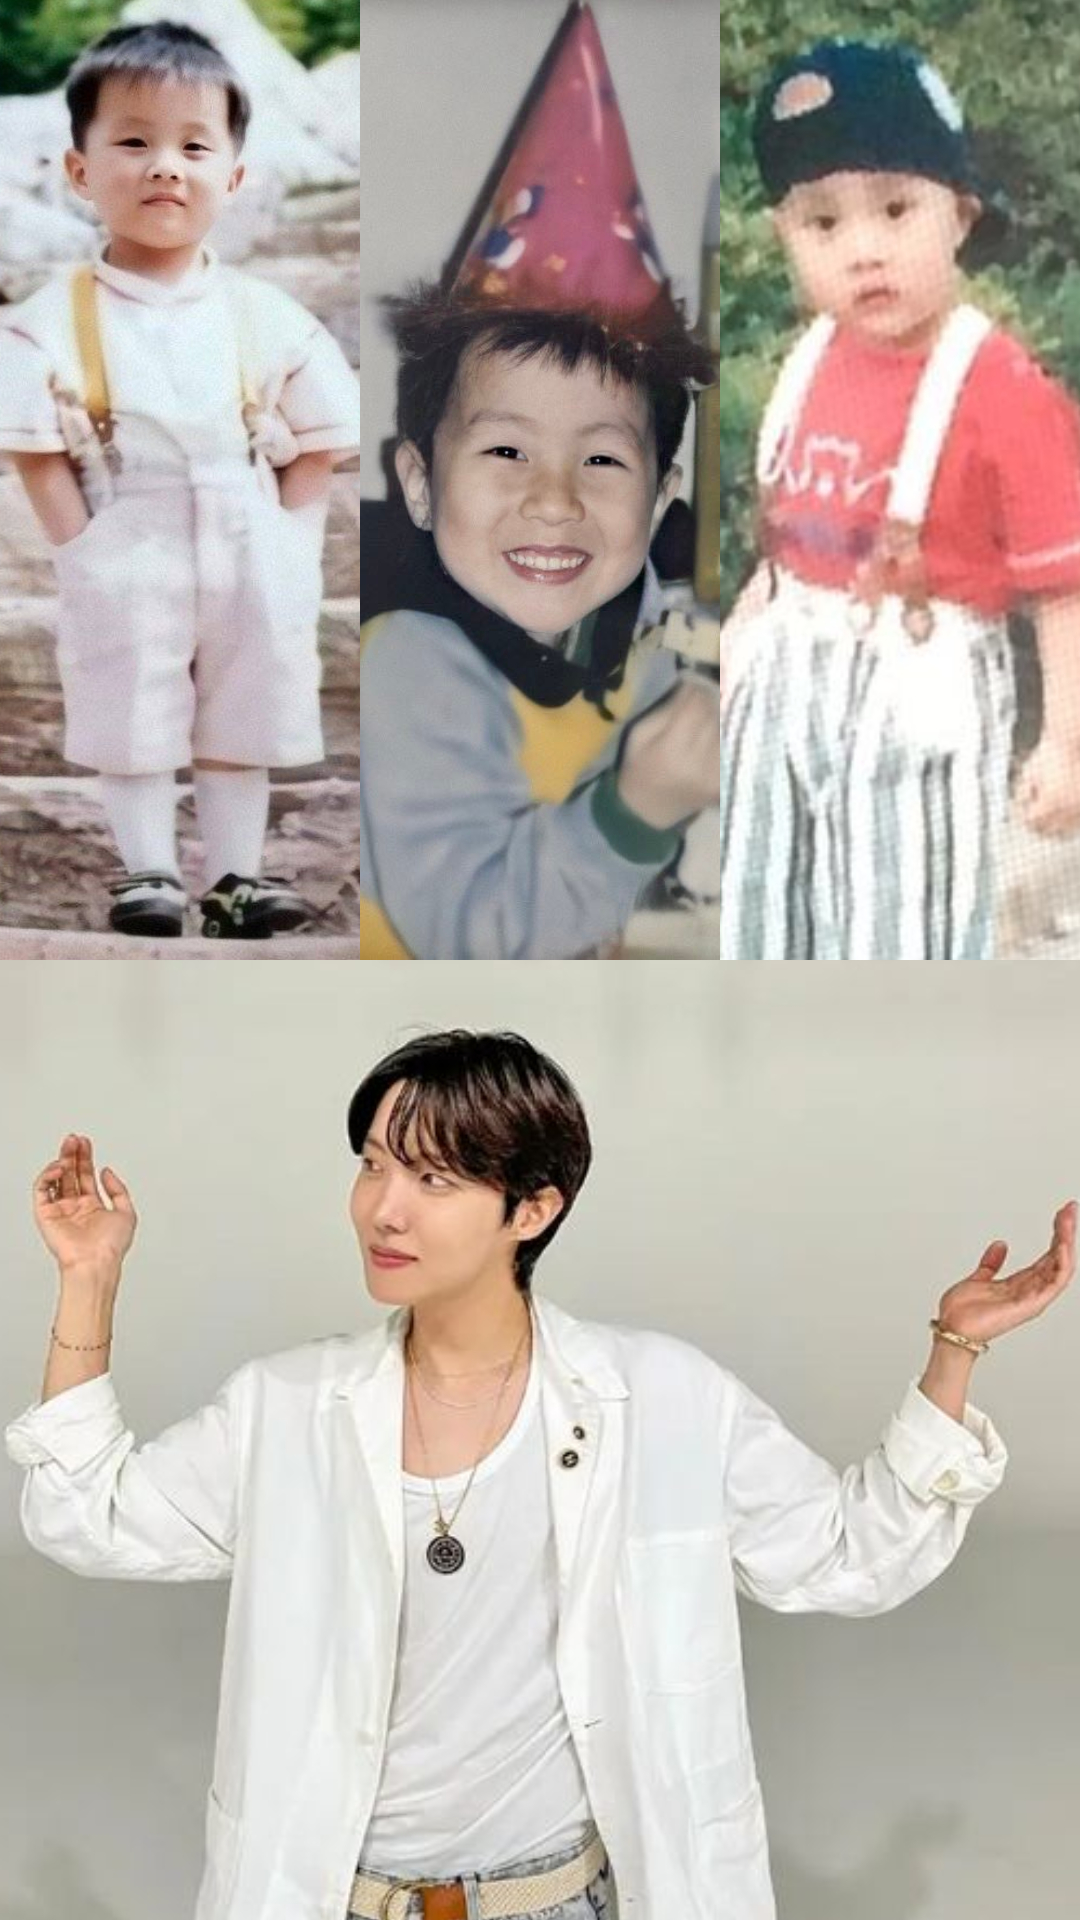 BTS' J-Hope childhood photos are gems you don't want to miss